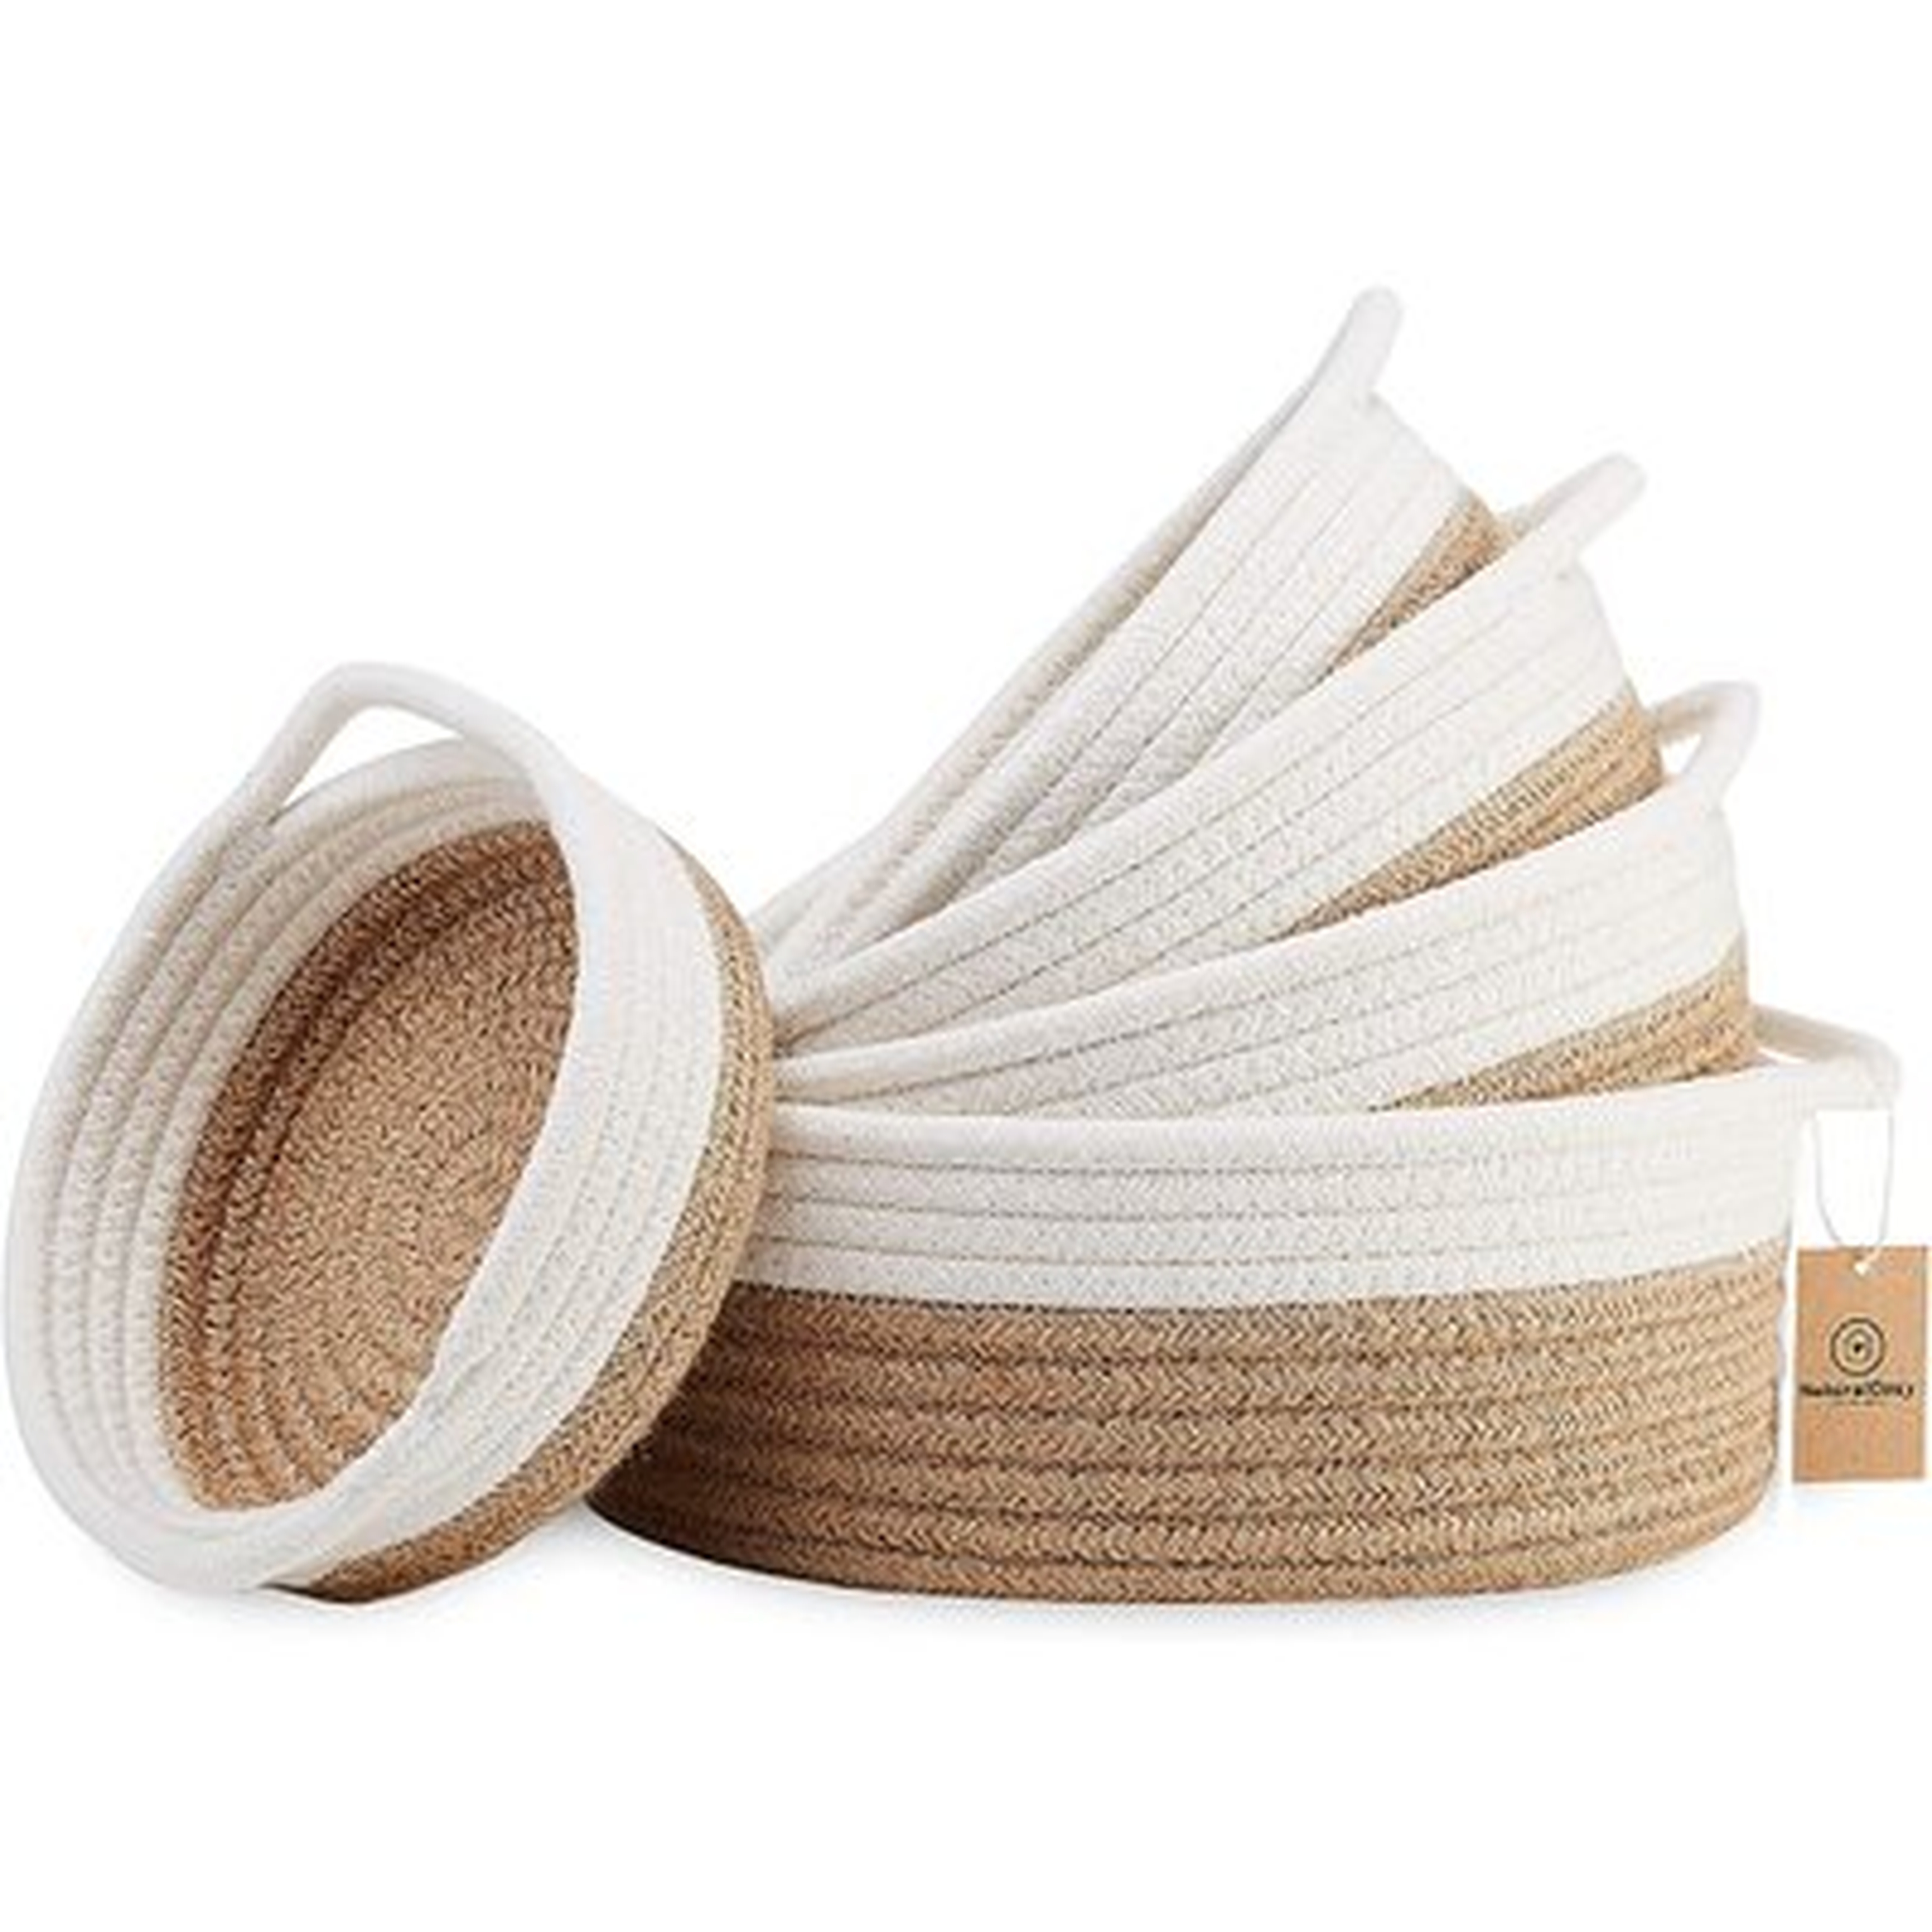 5-Piece Round Small Woven Baskets Set - 100% Natural Cotton Rope Baskets! Key Tray, Kids Montessori Toys, Bowl For Entryway, Jewelry Remote Fruits Desk Home Decor Shallow Catchall Baskets - Wayfair